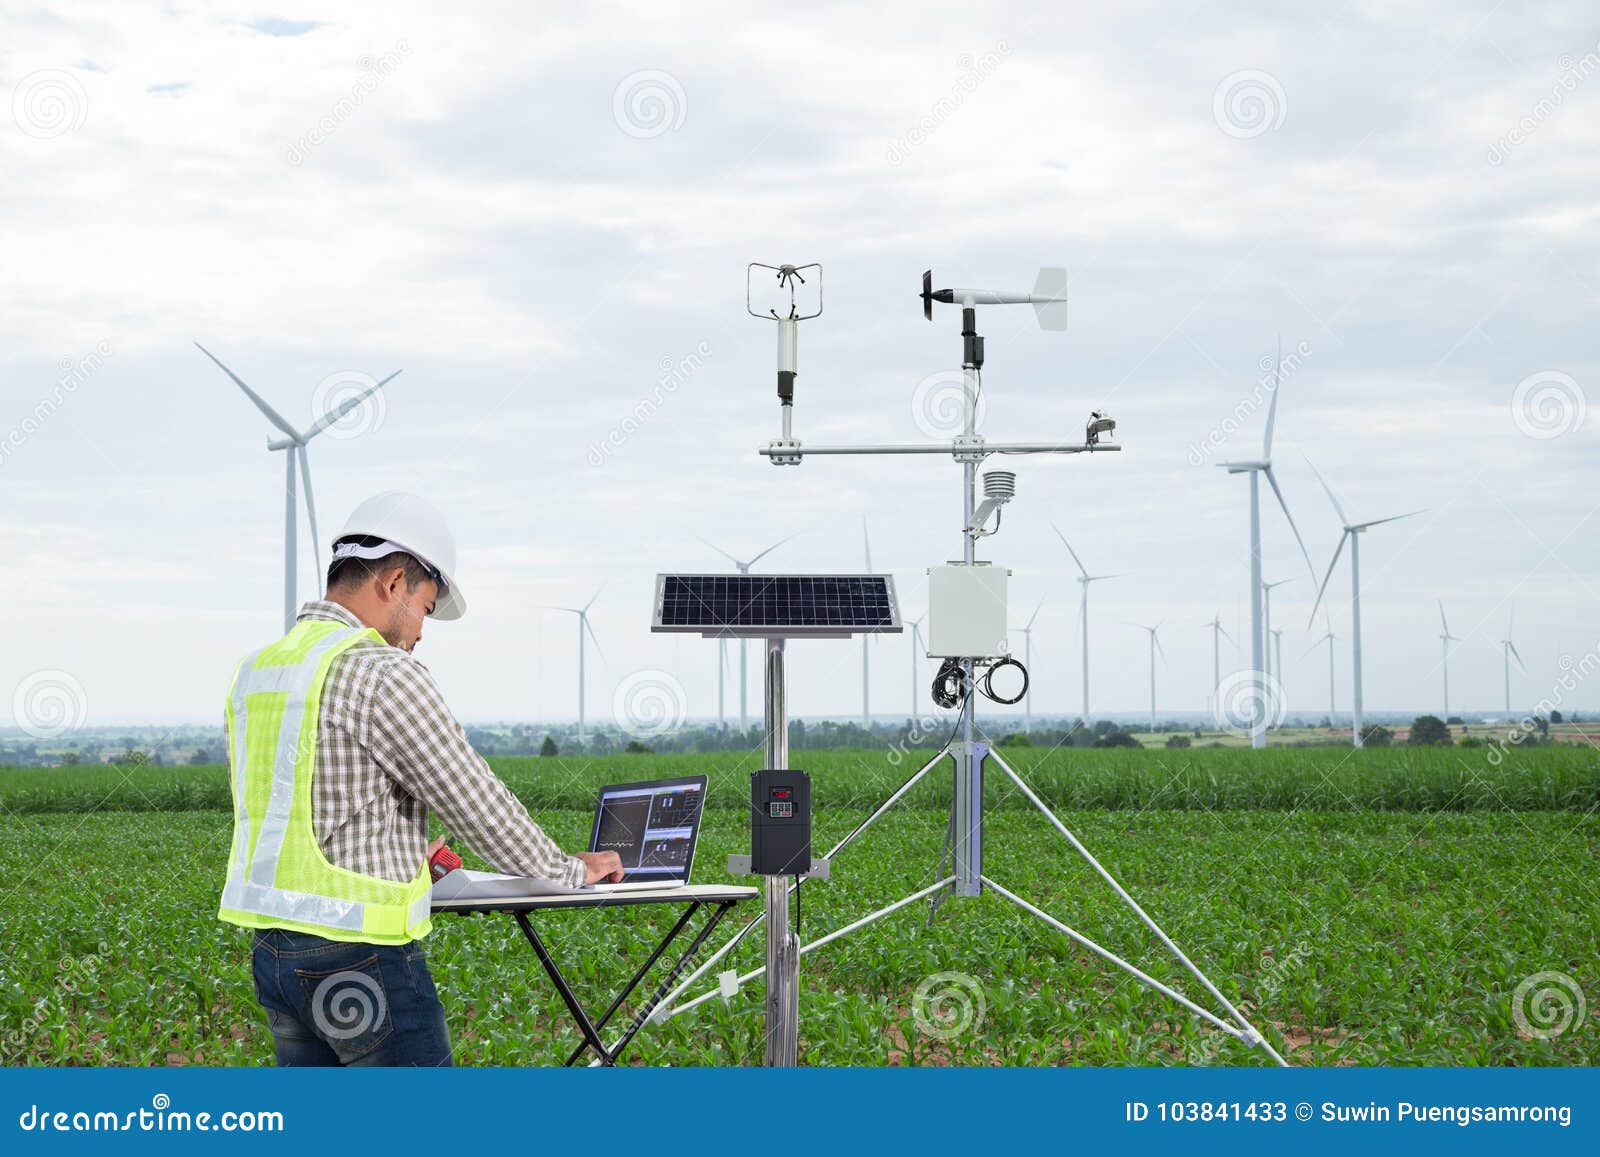 engineer using tablet computer collect data with meteorological